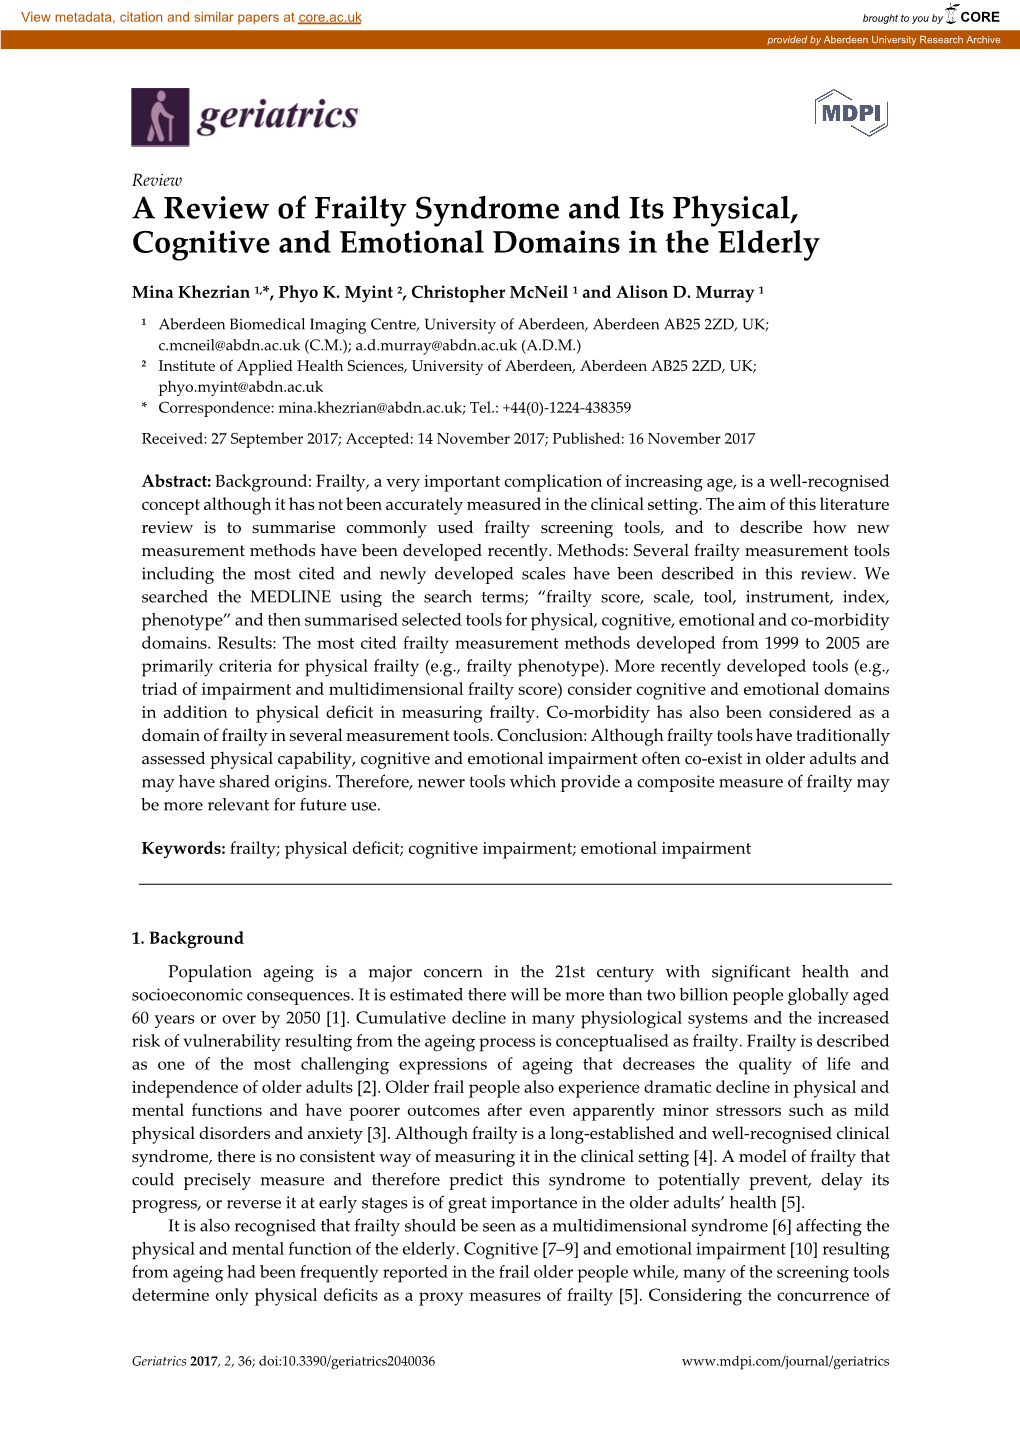 A Review of Frailty Syndrome and Its Physical, Cognitive and Emotional Domains in the Elderly